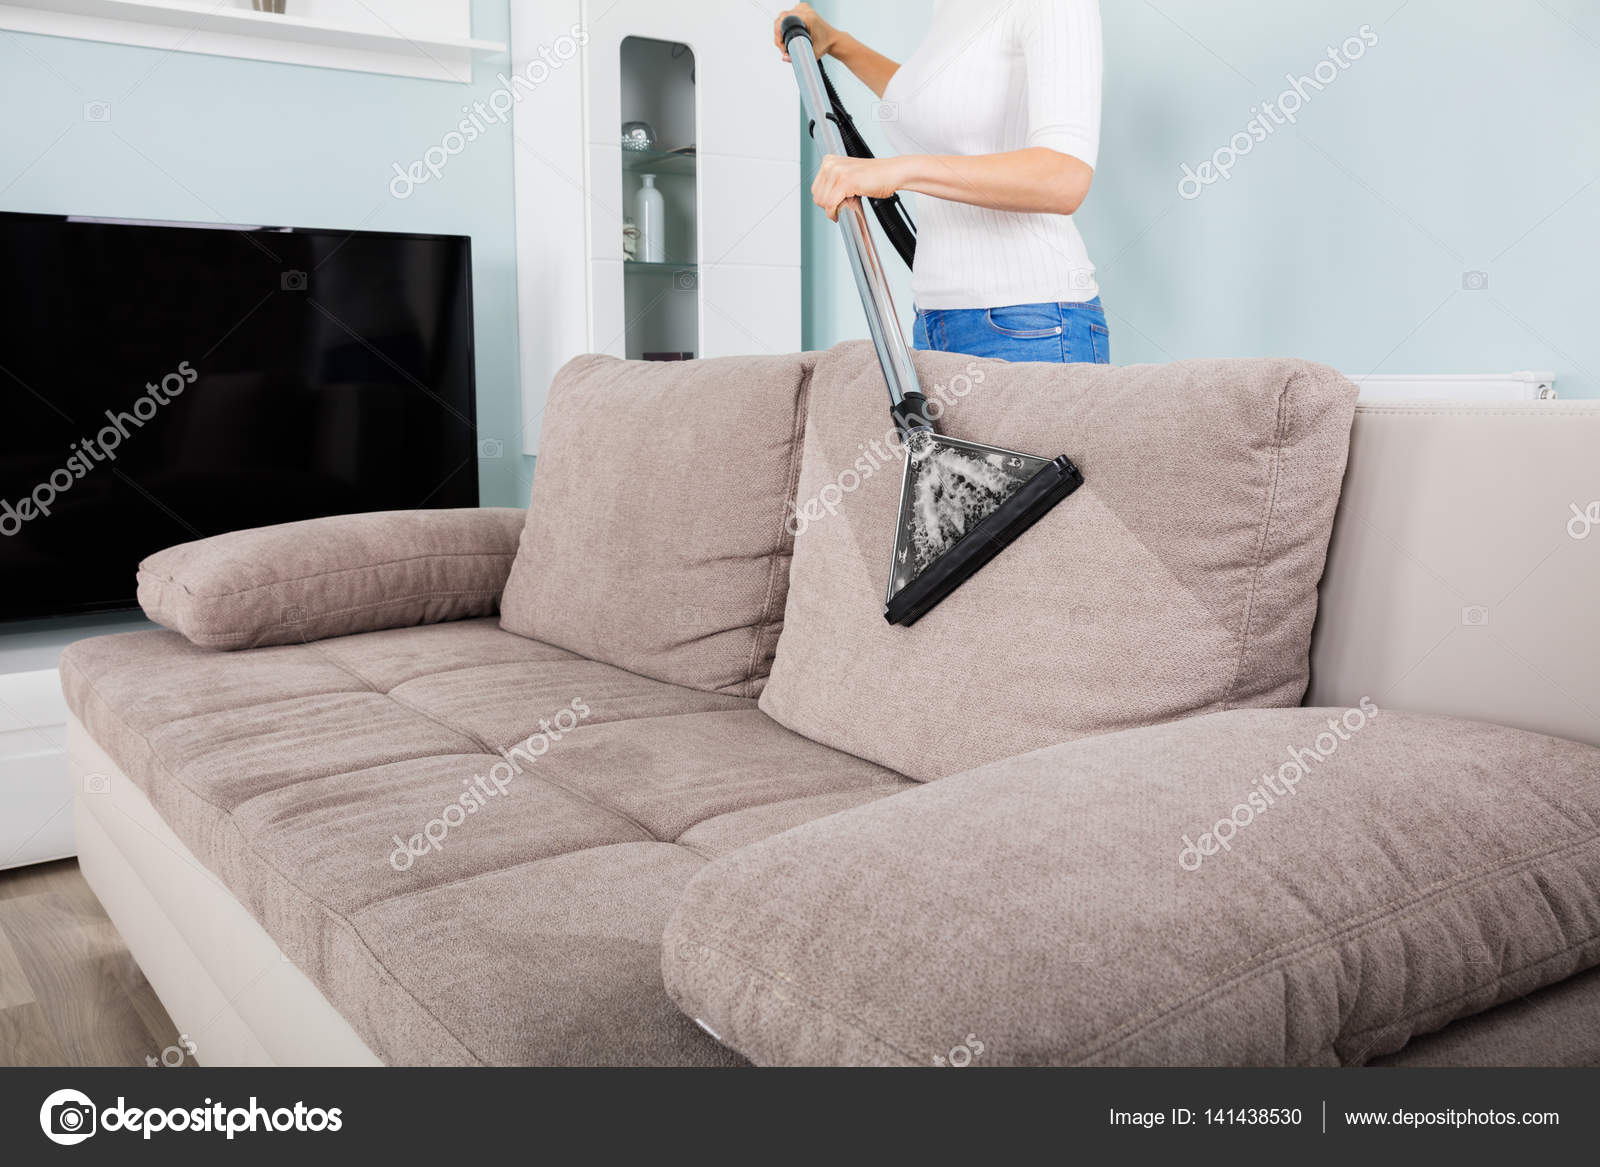 Woman Cleaning Sofa With Vacuum Cleaner, How To Clean Sofa At Home With Vacuum Cleaner